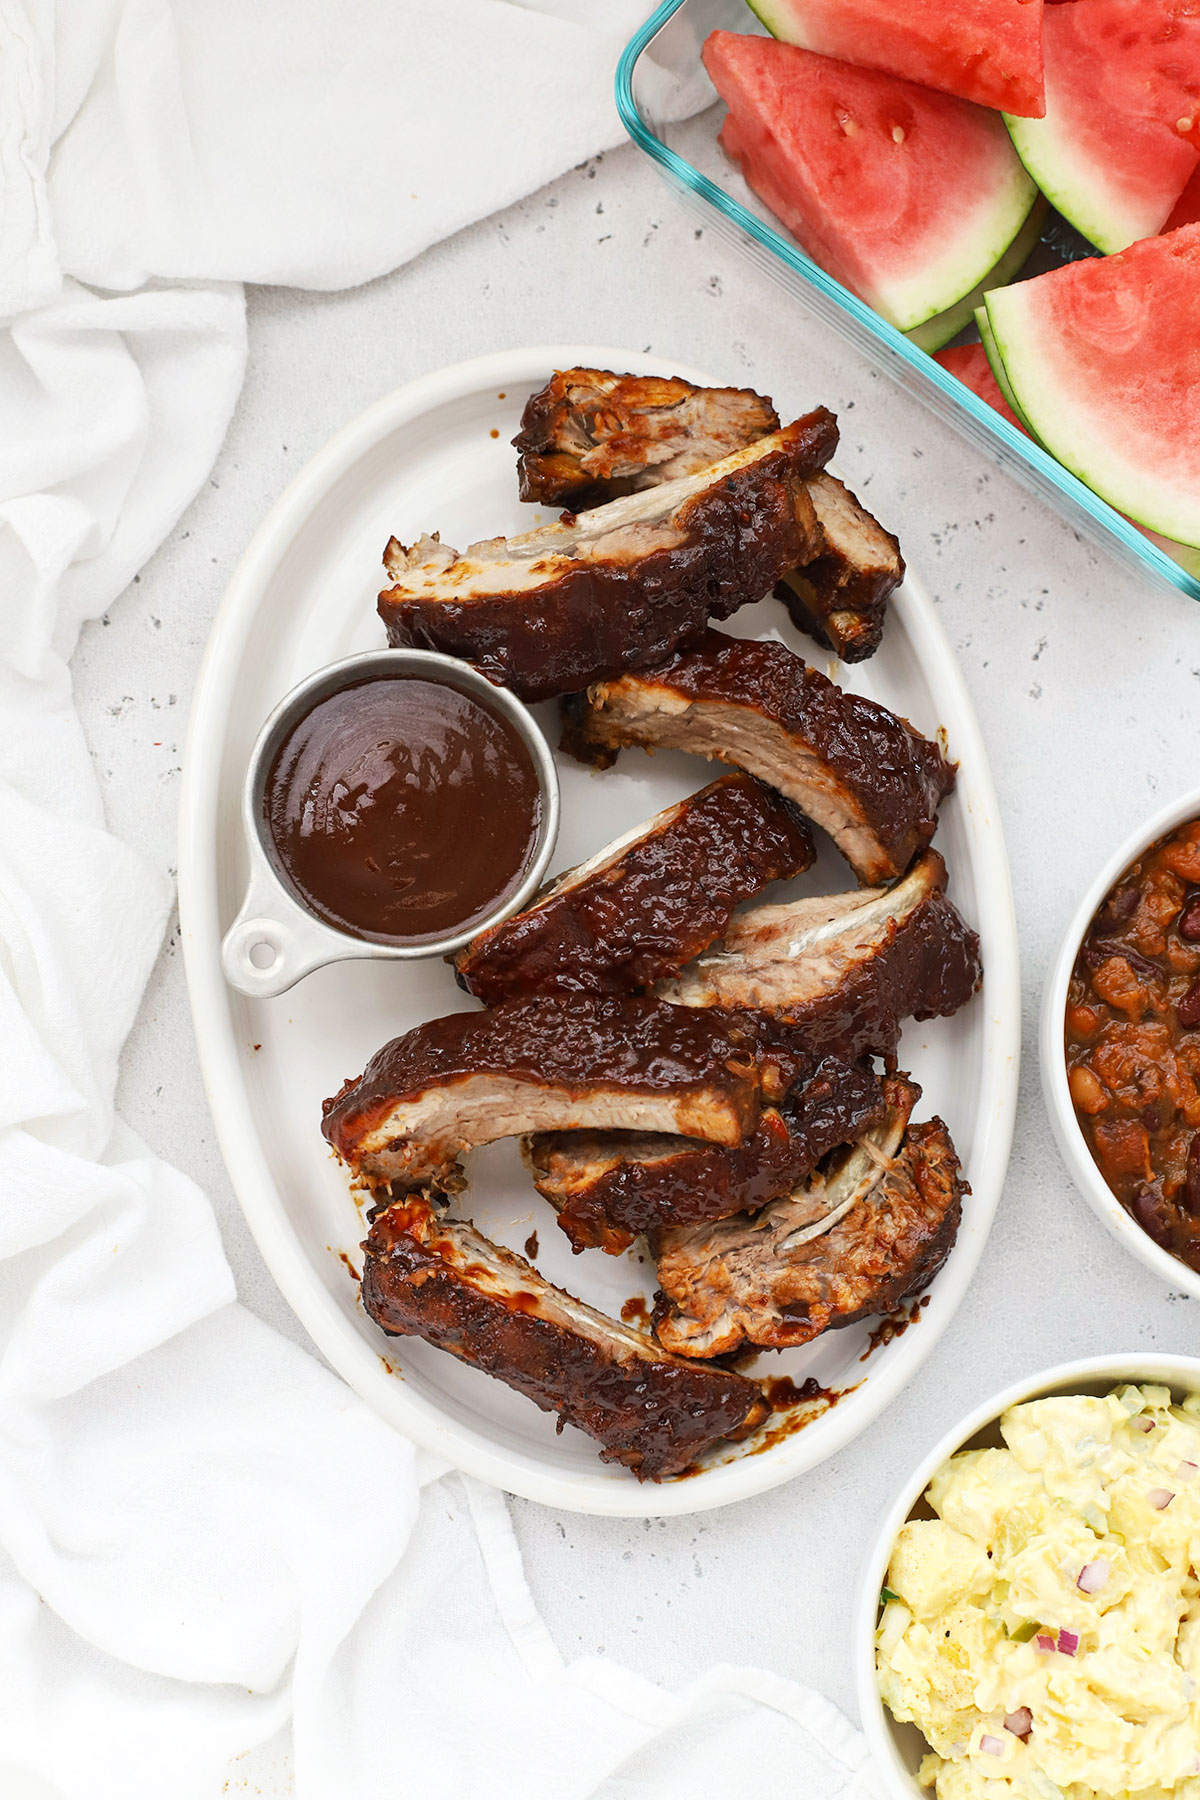 slow cooker ribs on a platter surrounded by bowls of side dishes--watermelon, baked beans, and potato salad